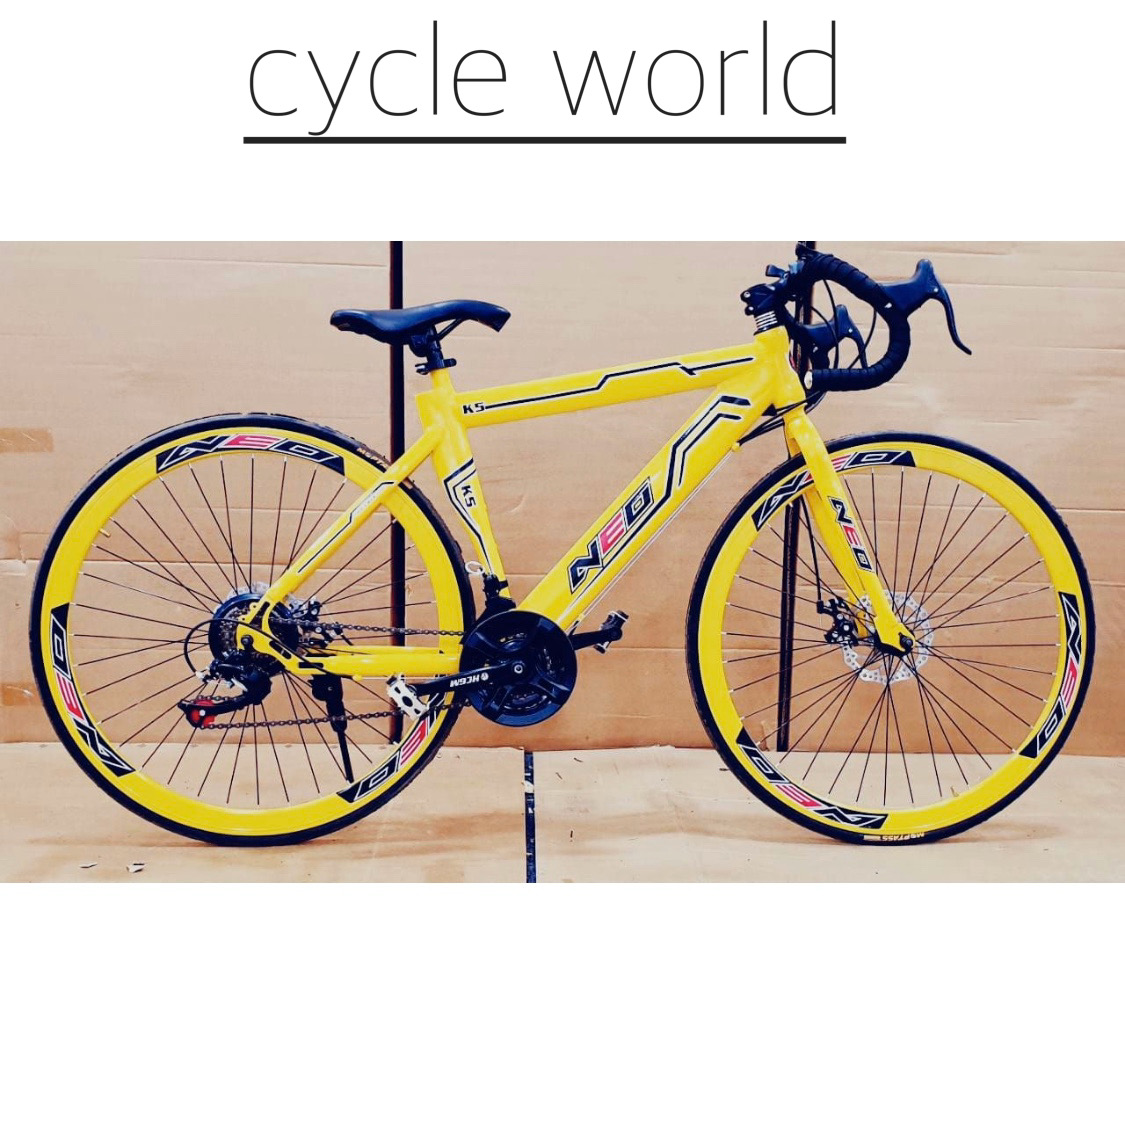 world of cycles